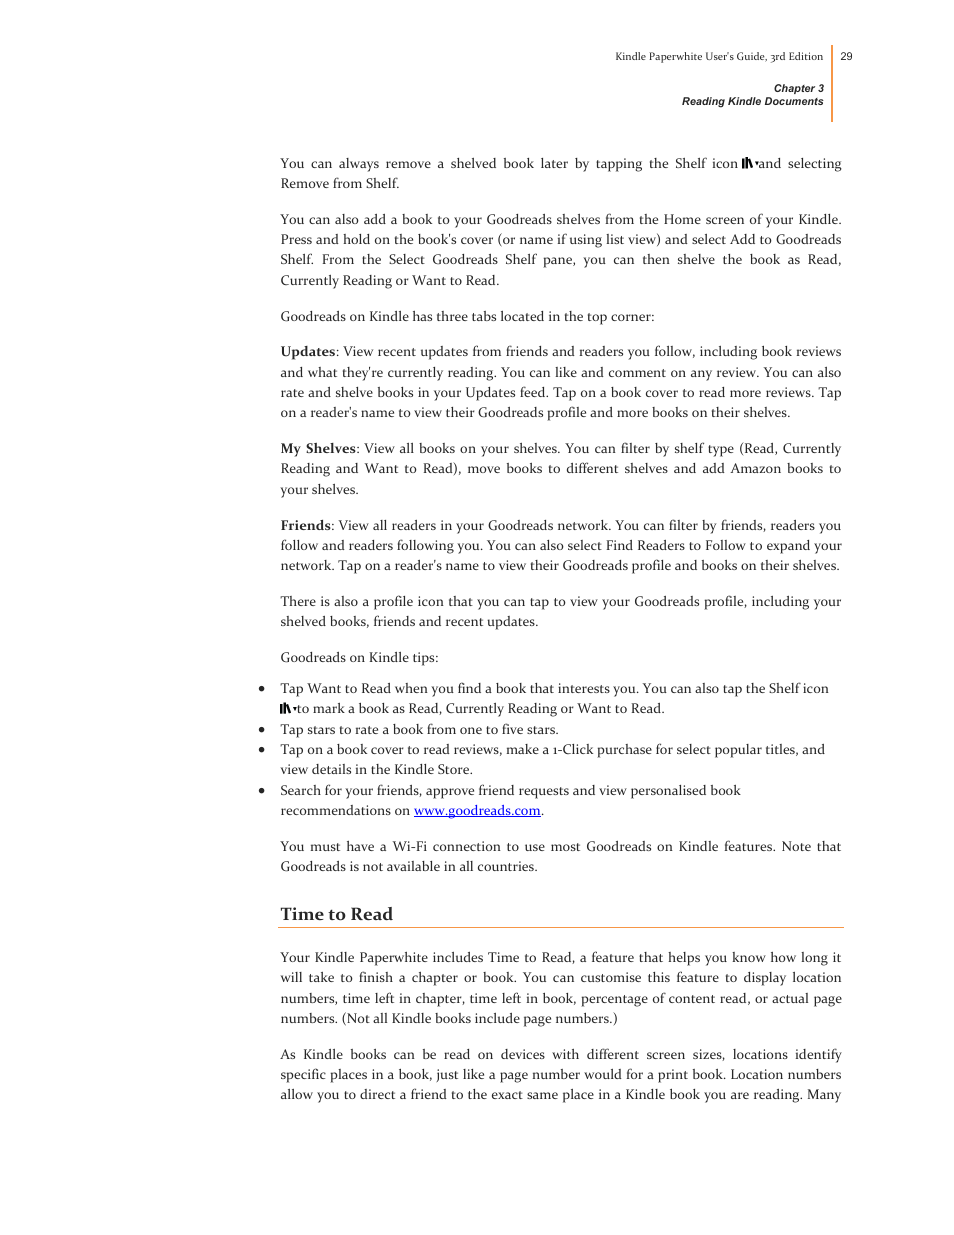 Time to read | Kindle Paperwhite (2nd Generation) User Manual | Page 29 / 47